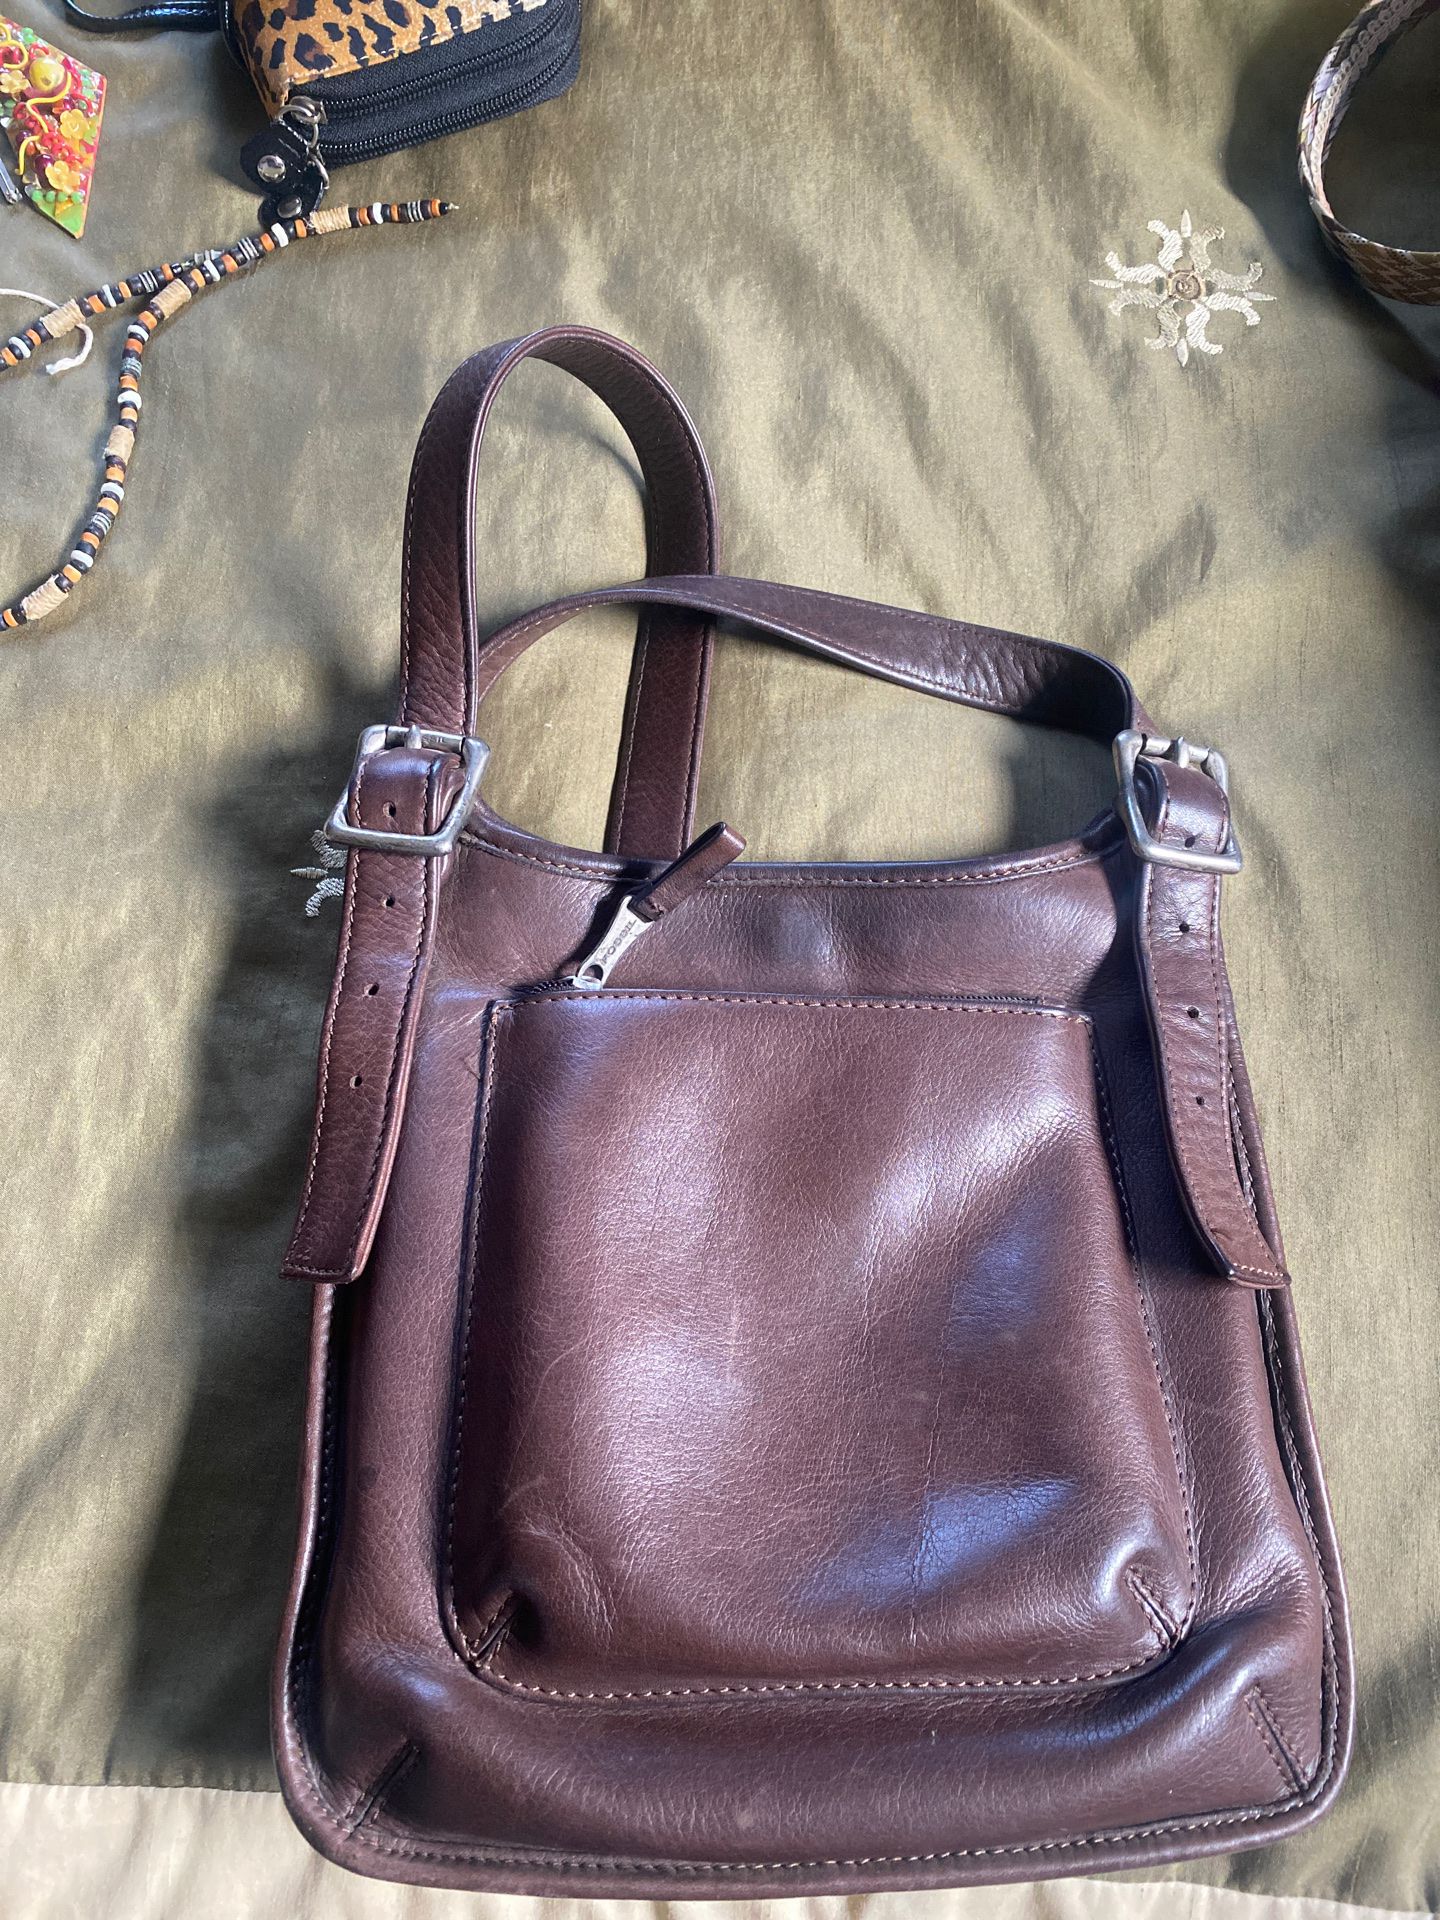 Fossil leather hand bag